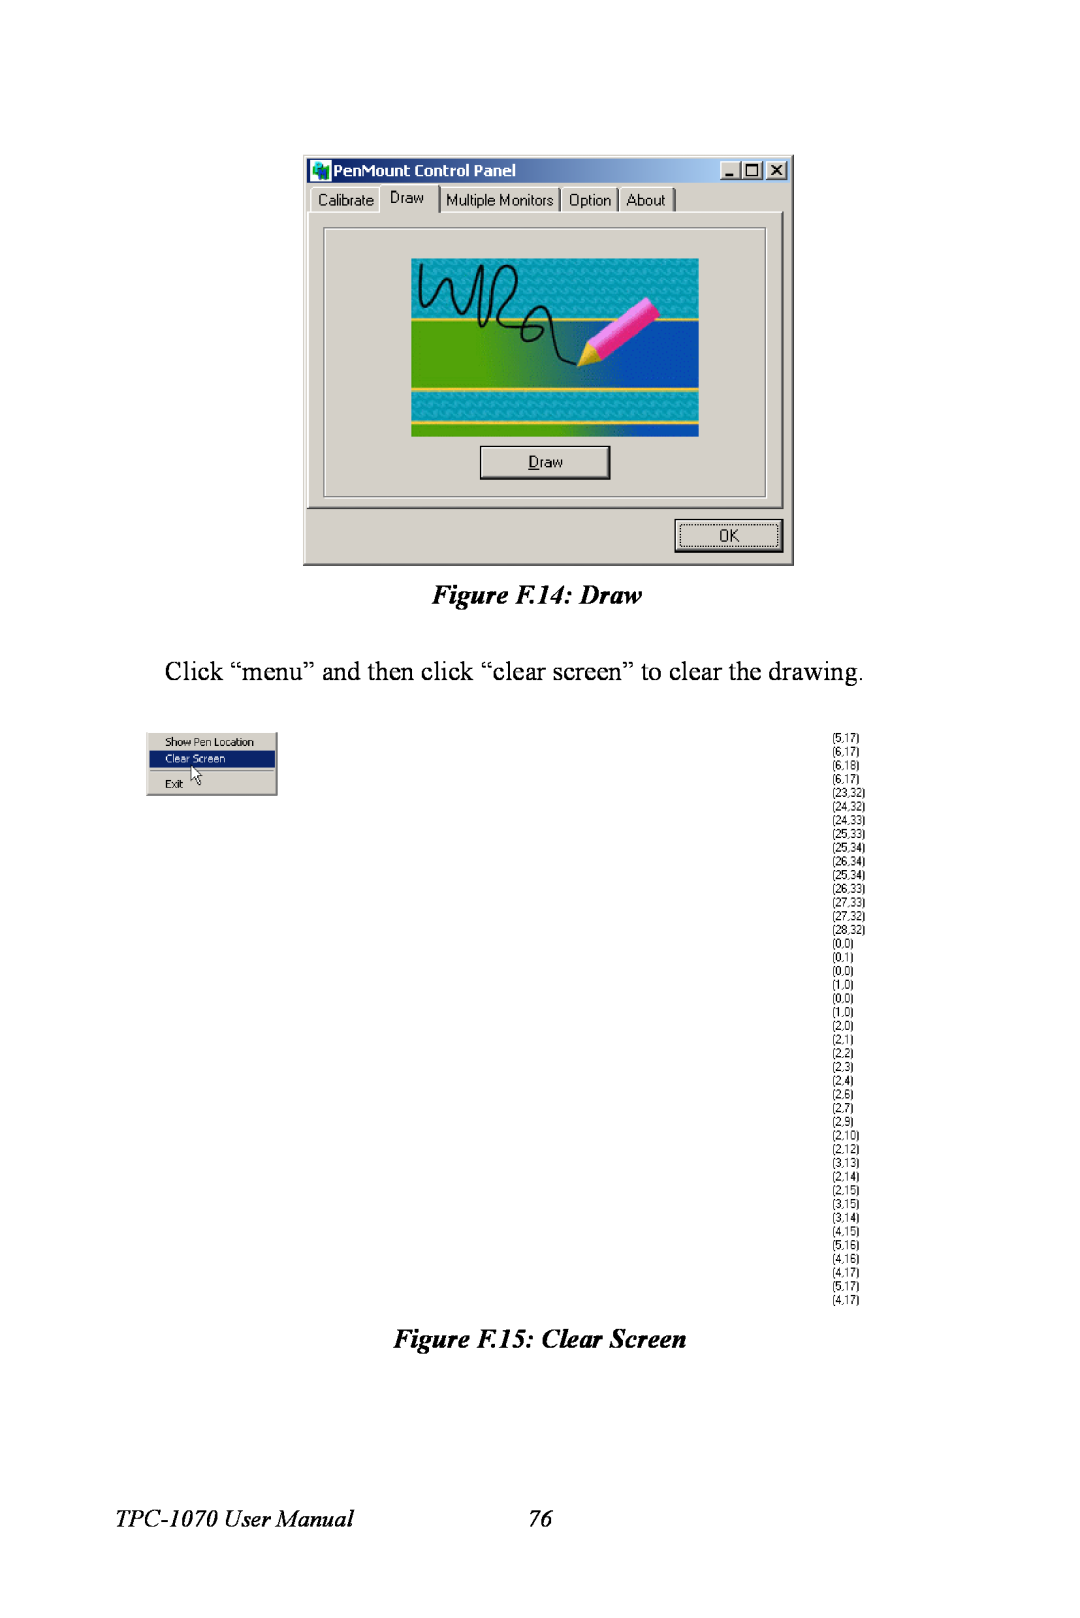 Intel TPC-1070 Figure F.14 Draw, Click “menu” and then click “clear screen” to clear the drawing, Figure F.15 Clear Screen 